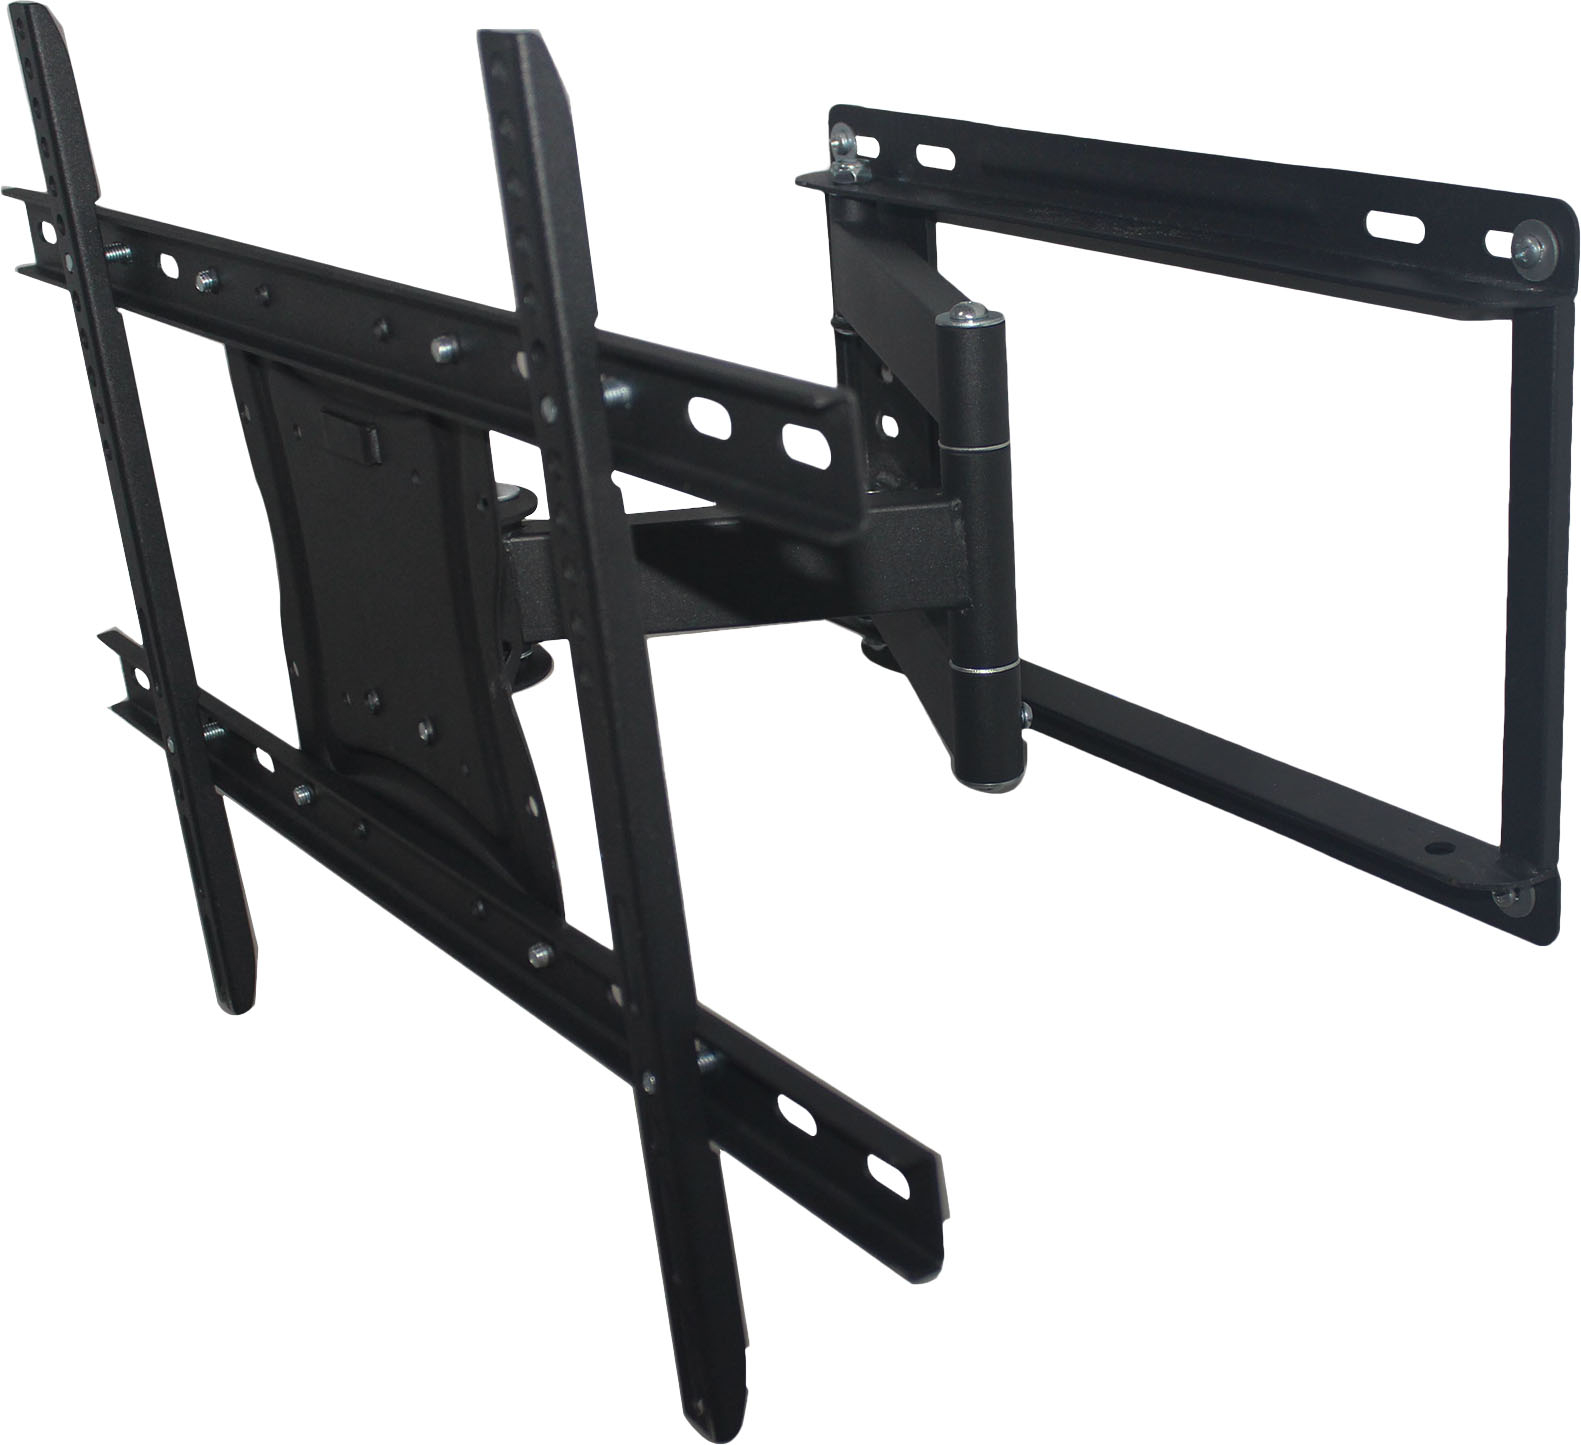 Angle View: Sanus - Elite Series Swivel TV Wall Mount for Most 46" - 95" TVs up to 175lbs - Graphite